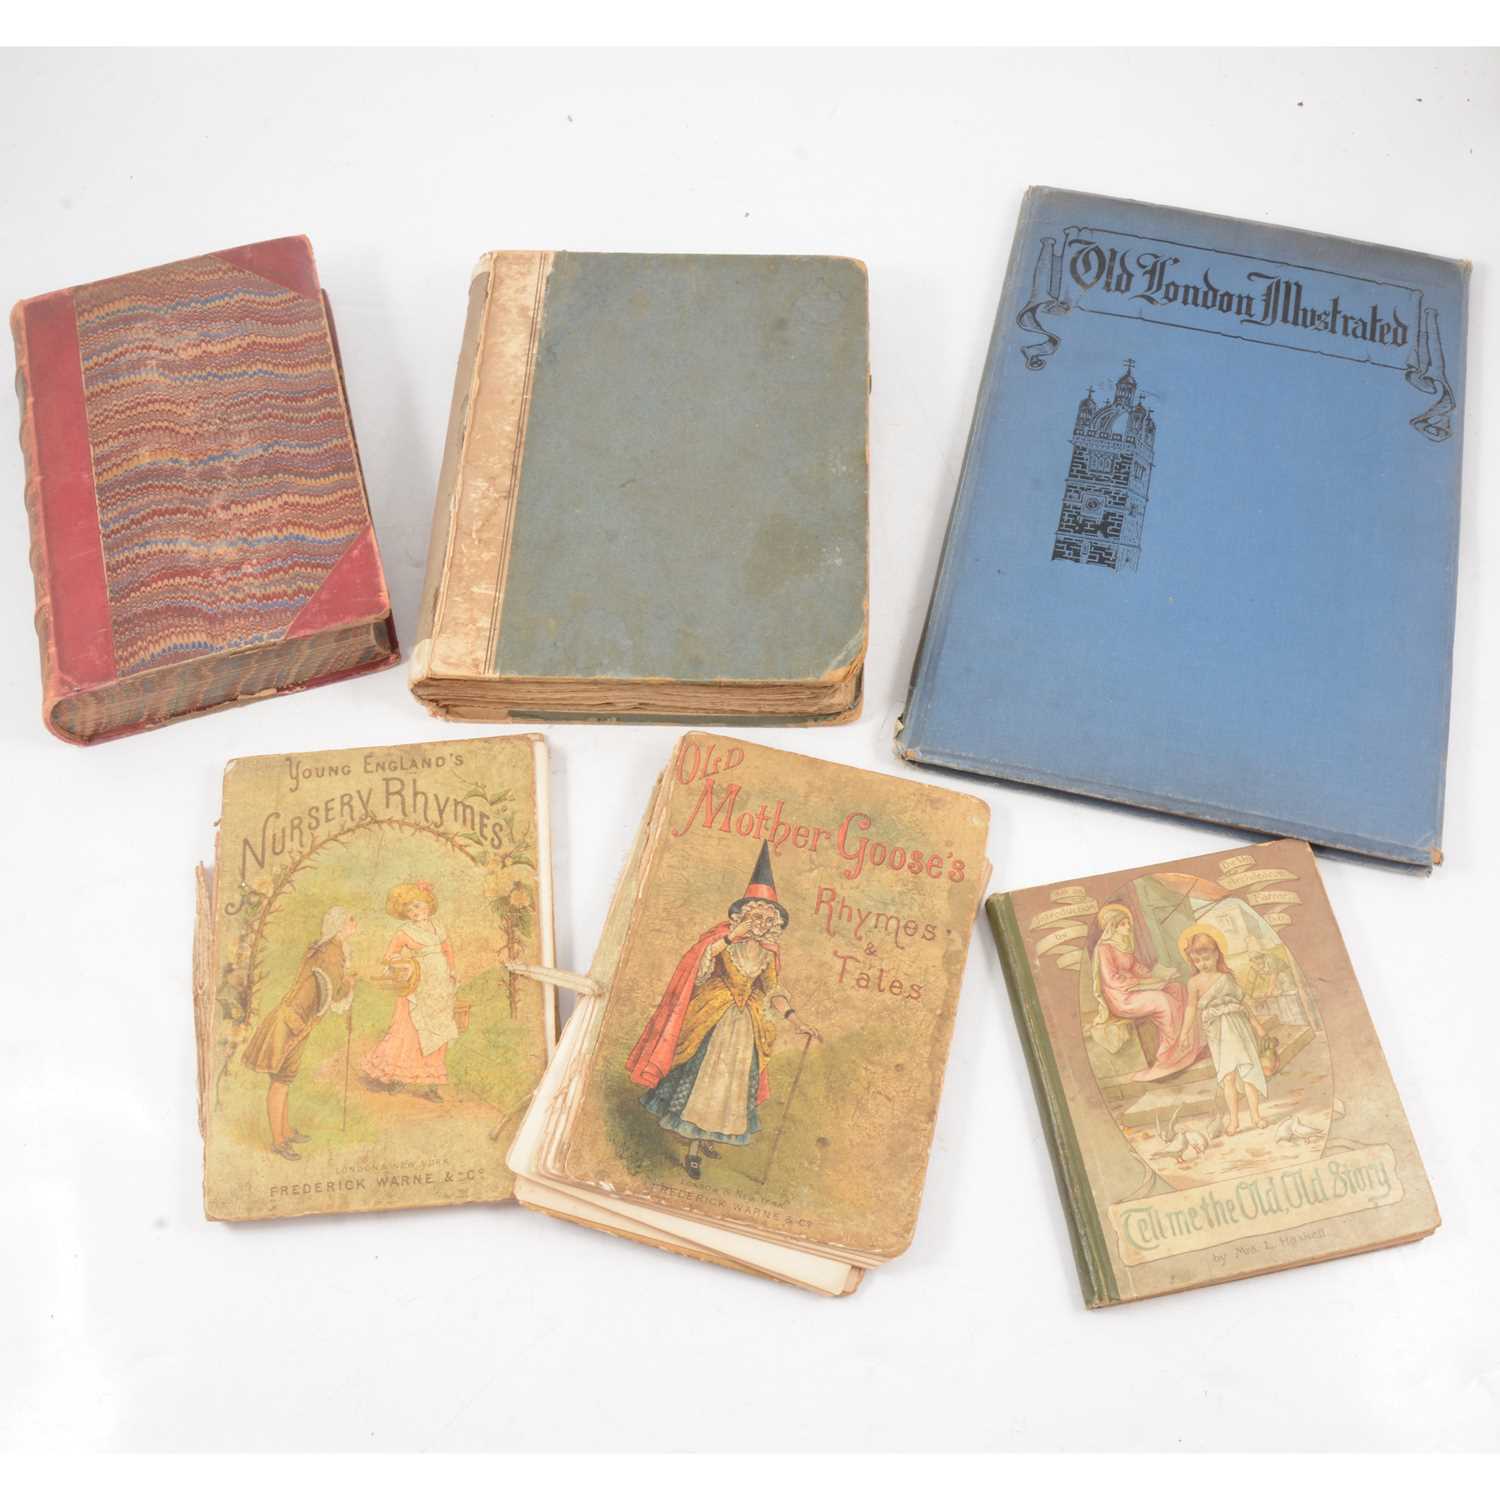 Lot 115 - Gibbon Roman Empire and other books